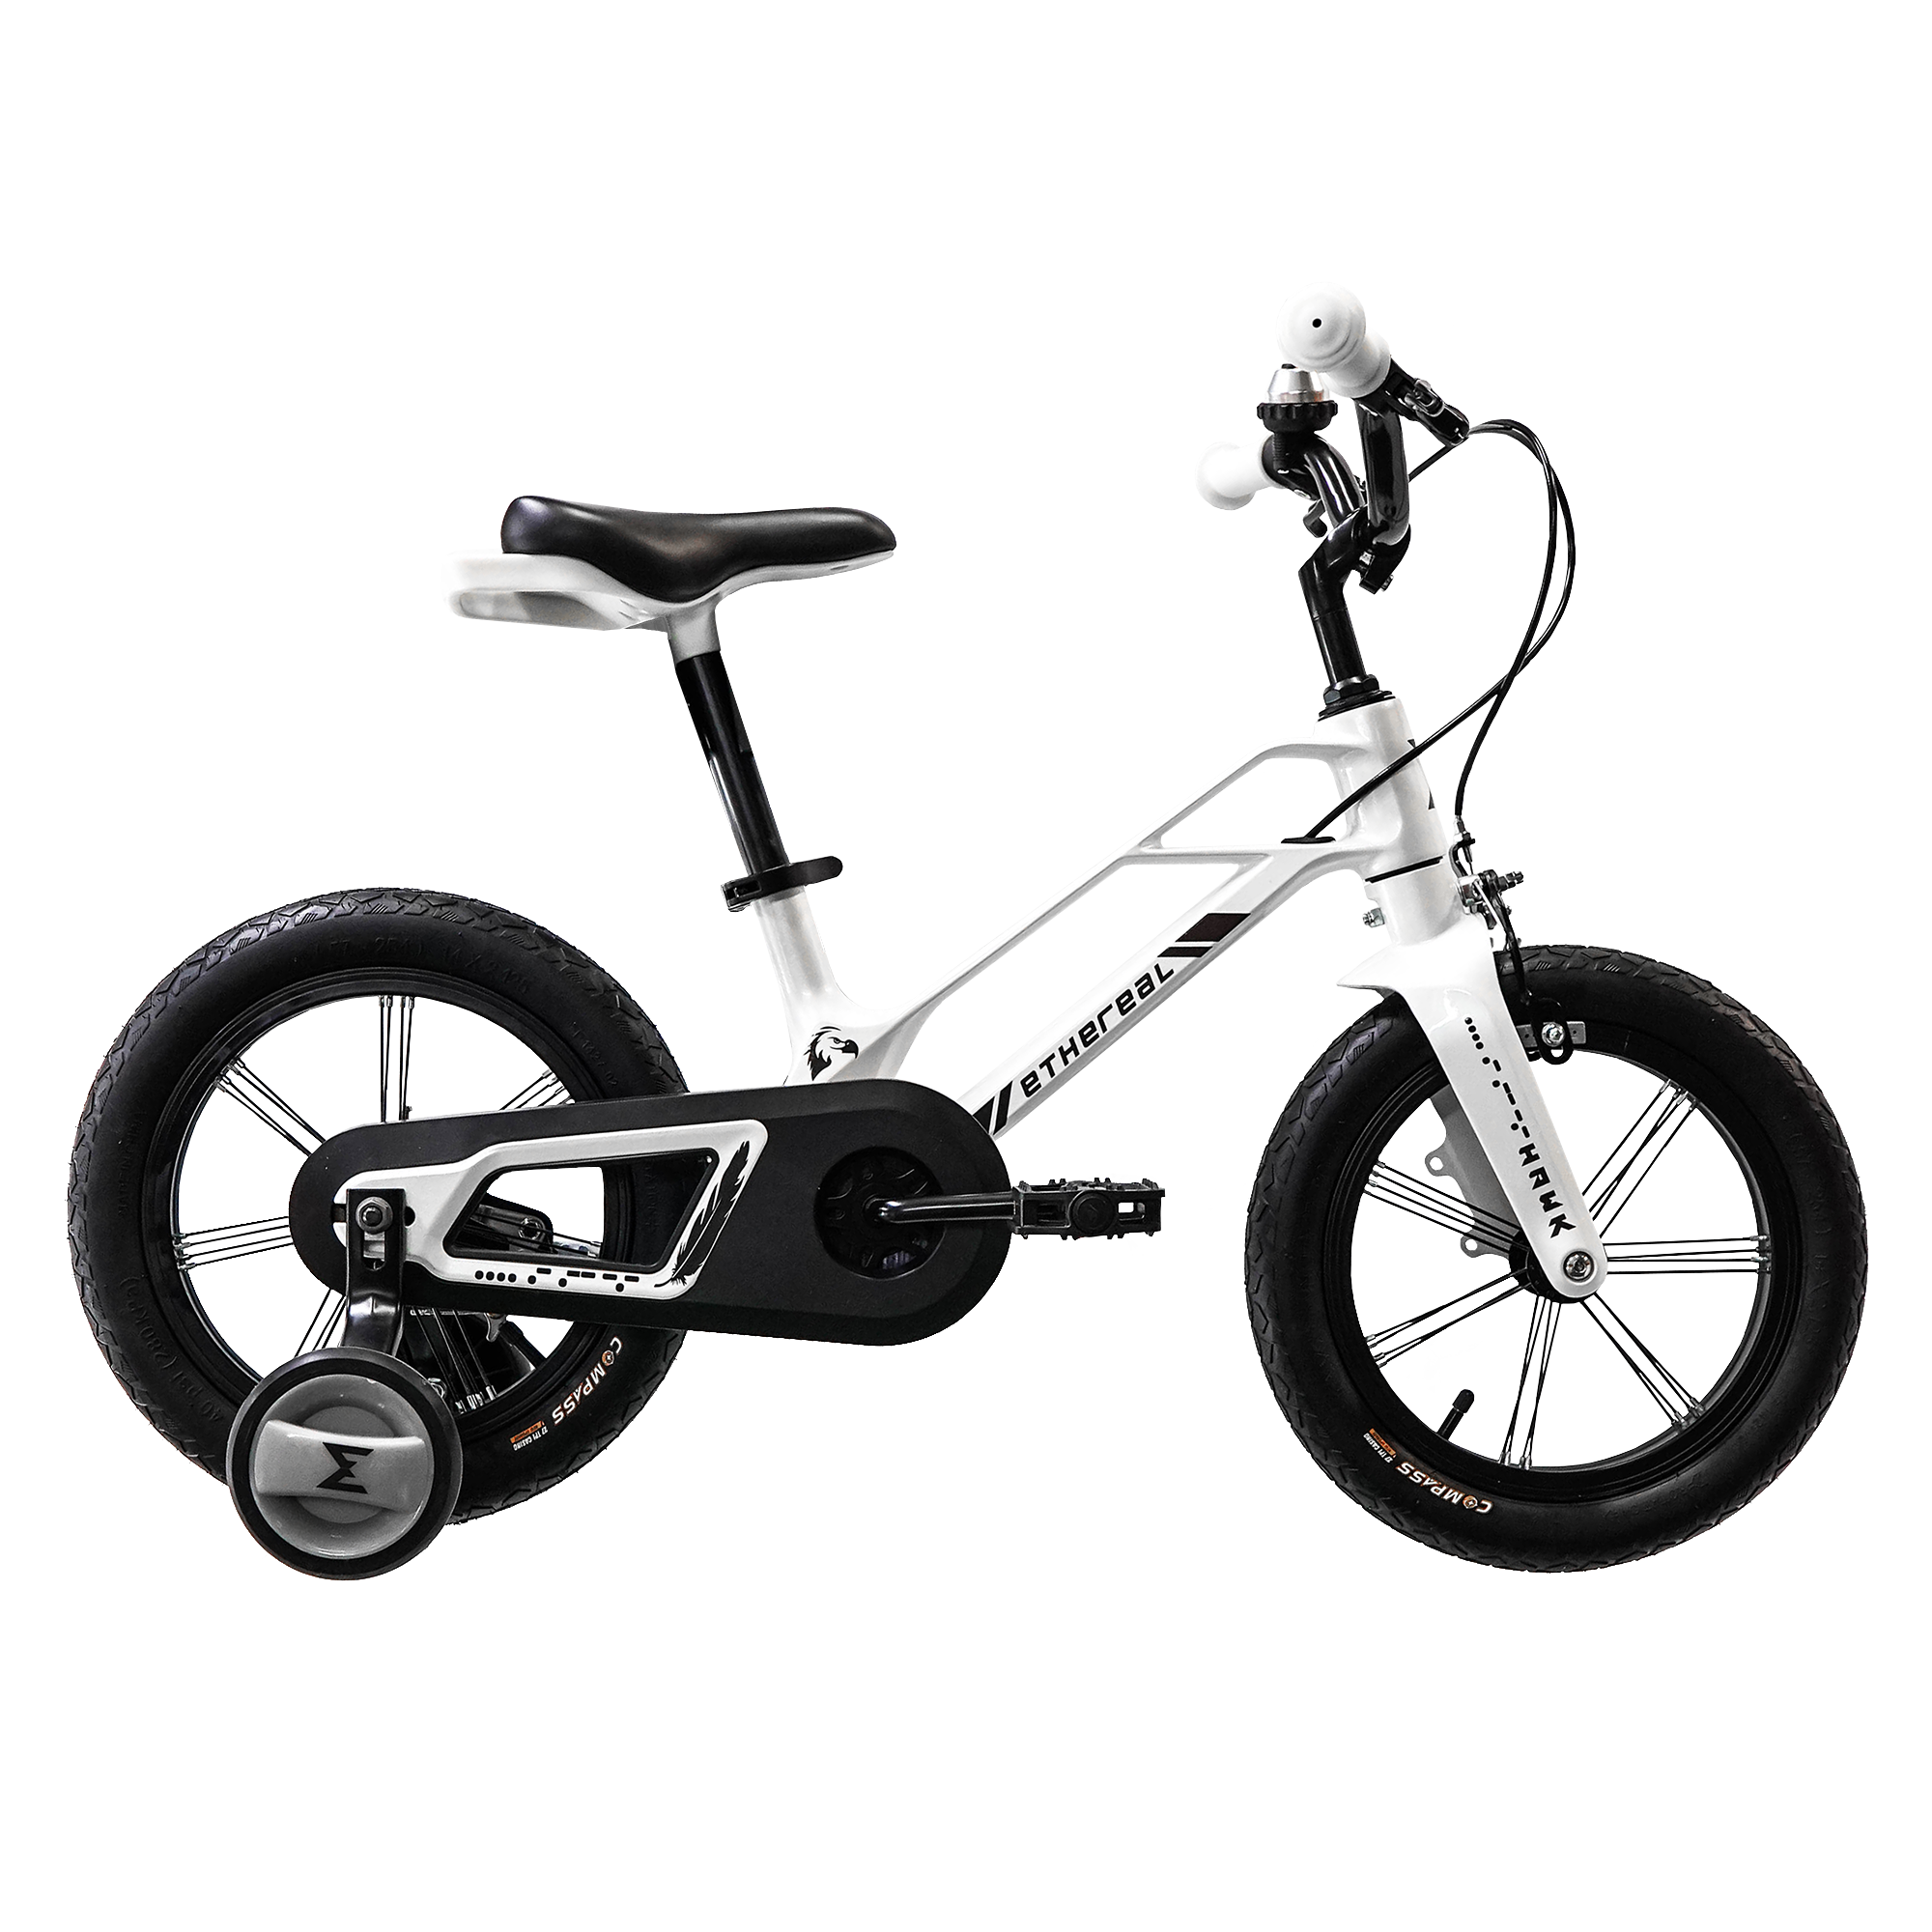 Ethereal Hawk Kids Bike: Lightweight & Safe for Young Riders | The Bike Atrium